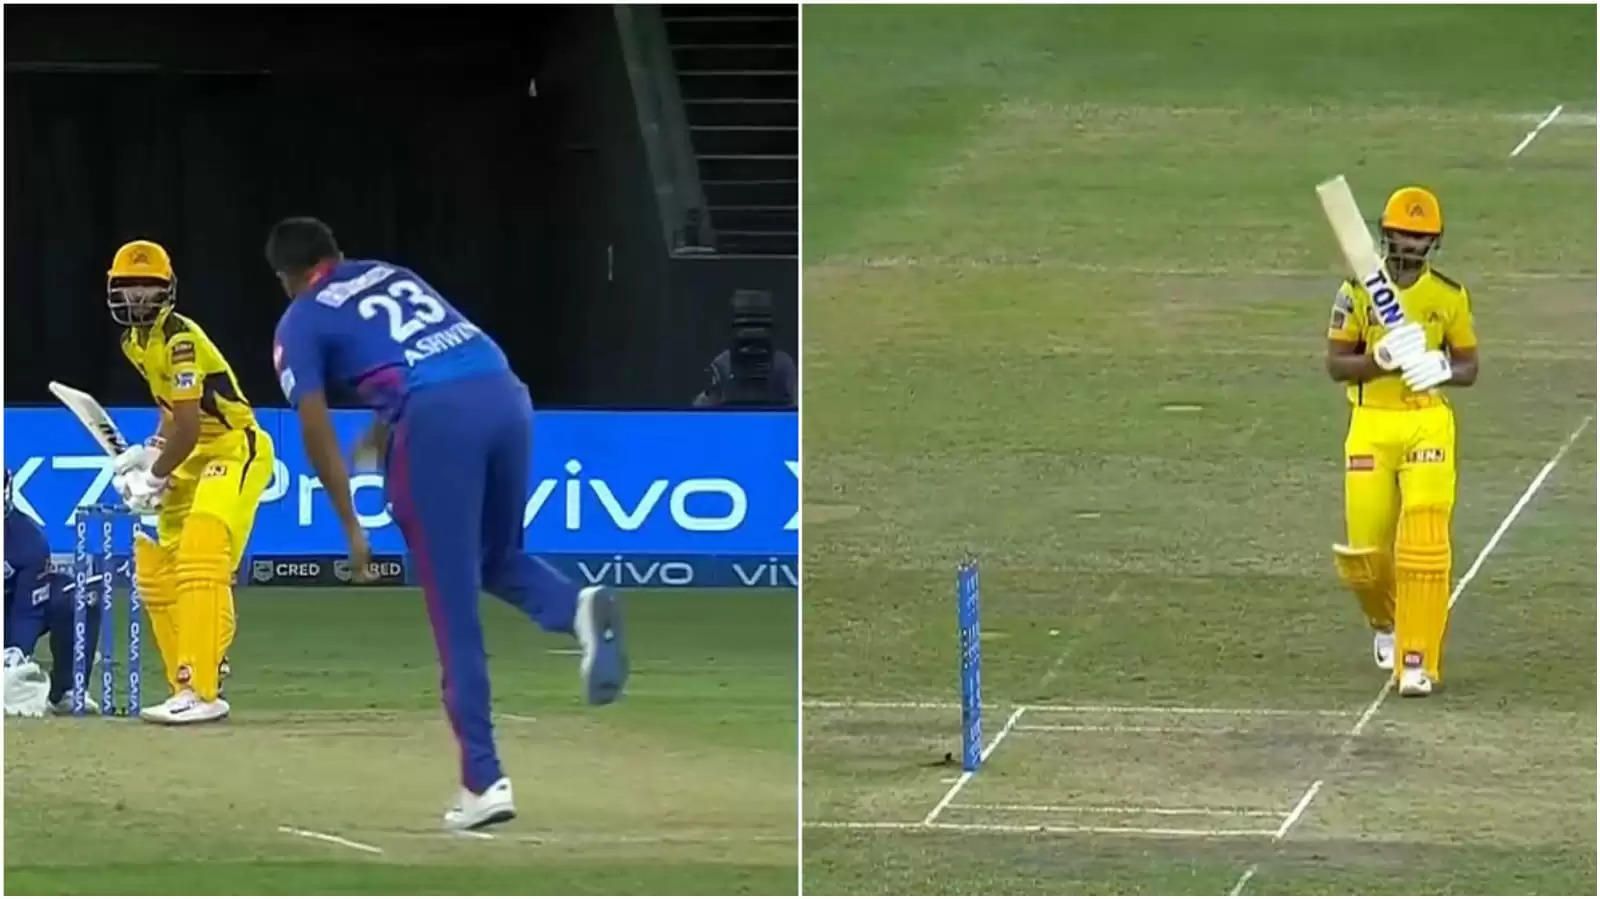 WATCH: Ashwin tries to be cheeky with Gaikwad; batter retorts with similar gesture